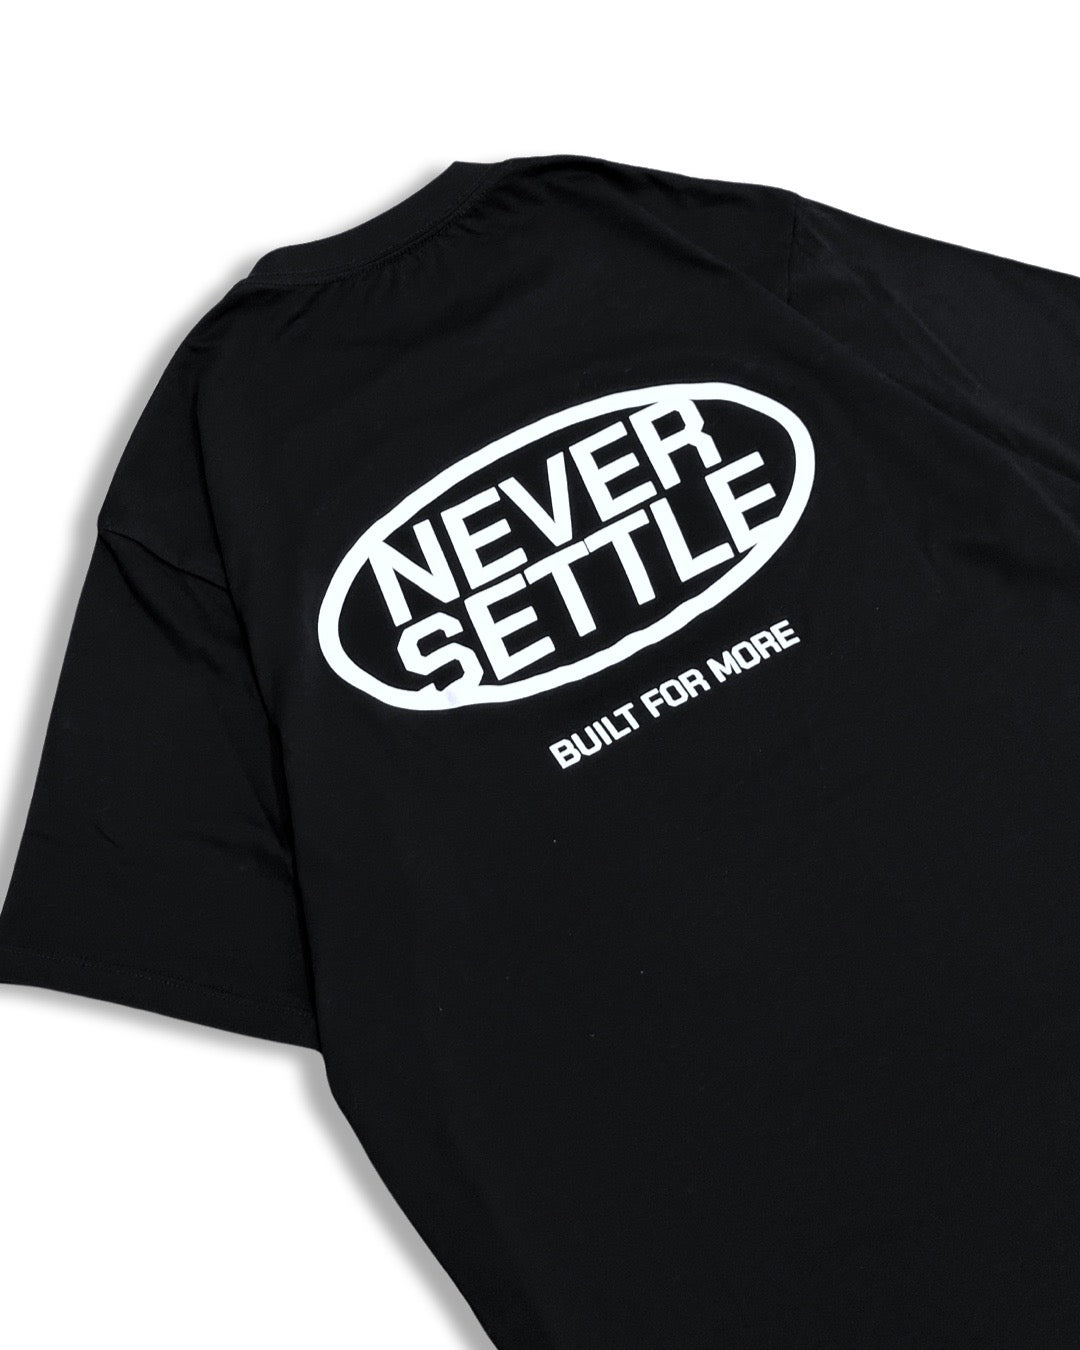 Never Settle Relaxed T-Shirt [Limited Edition] - T-Shirt - Gym Apparel Egypt